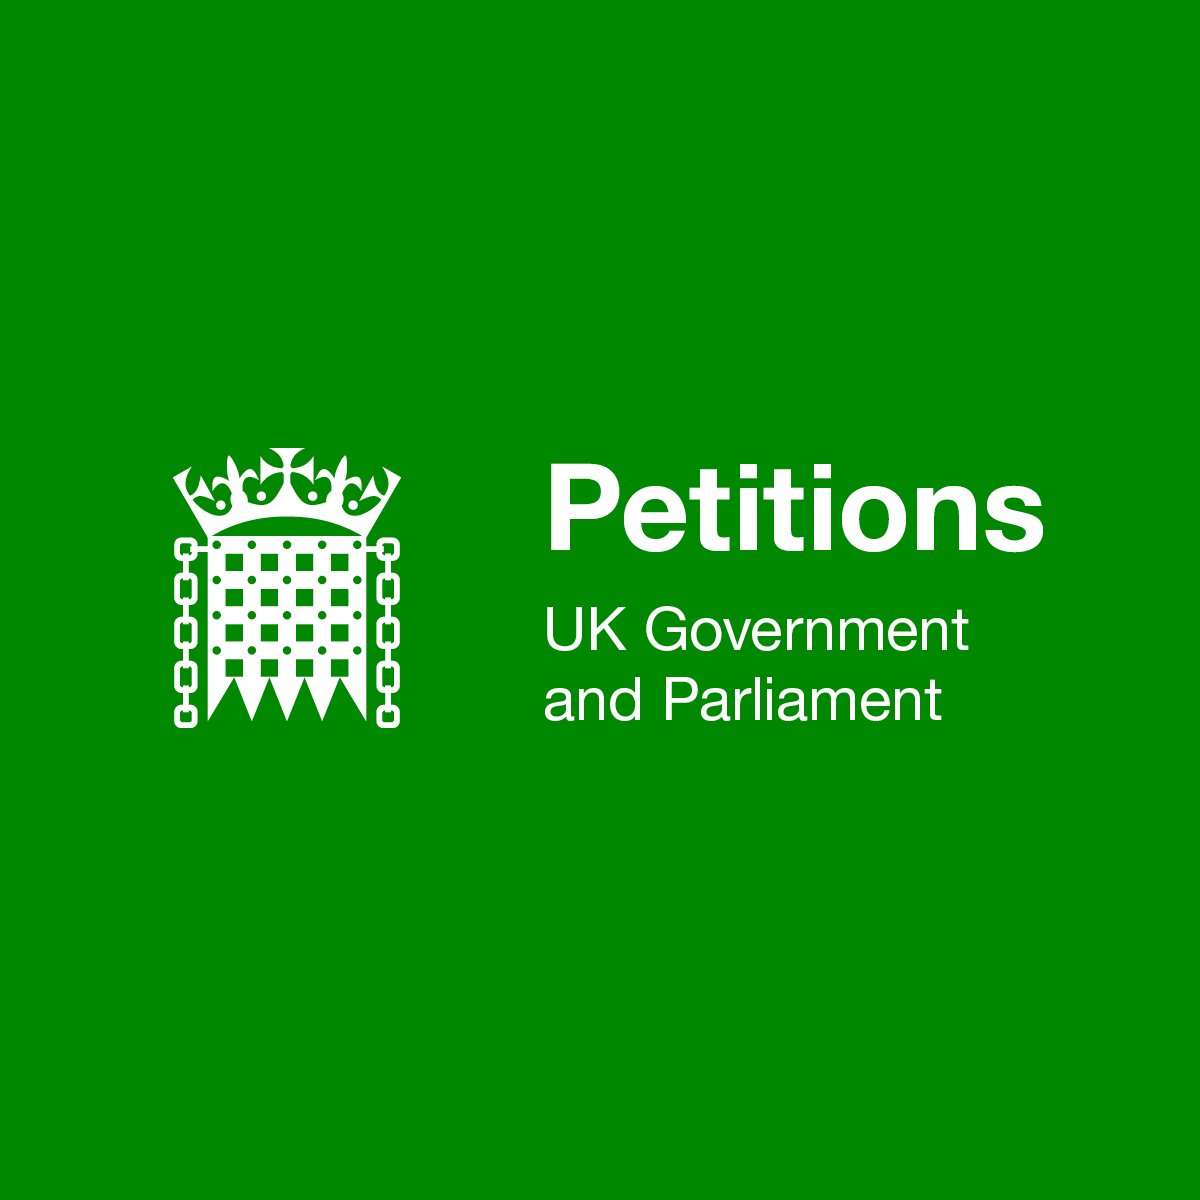 UK stoners someone made a petition to give the public the option to legalise cannabis, let's get it to parliament!